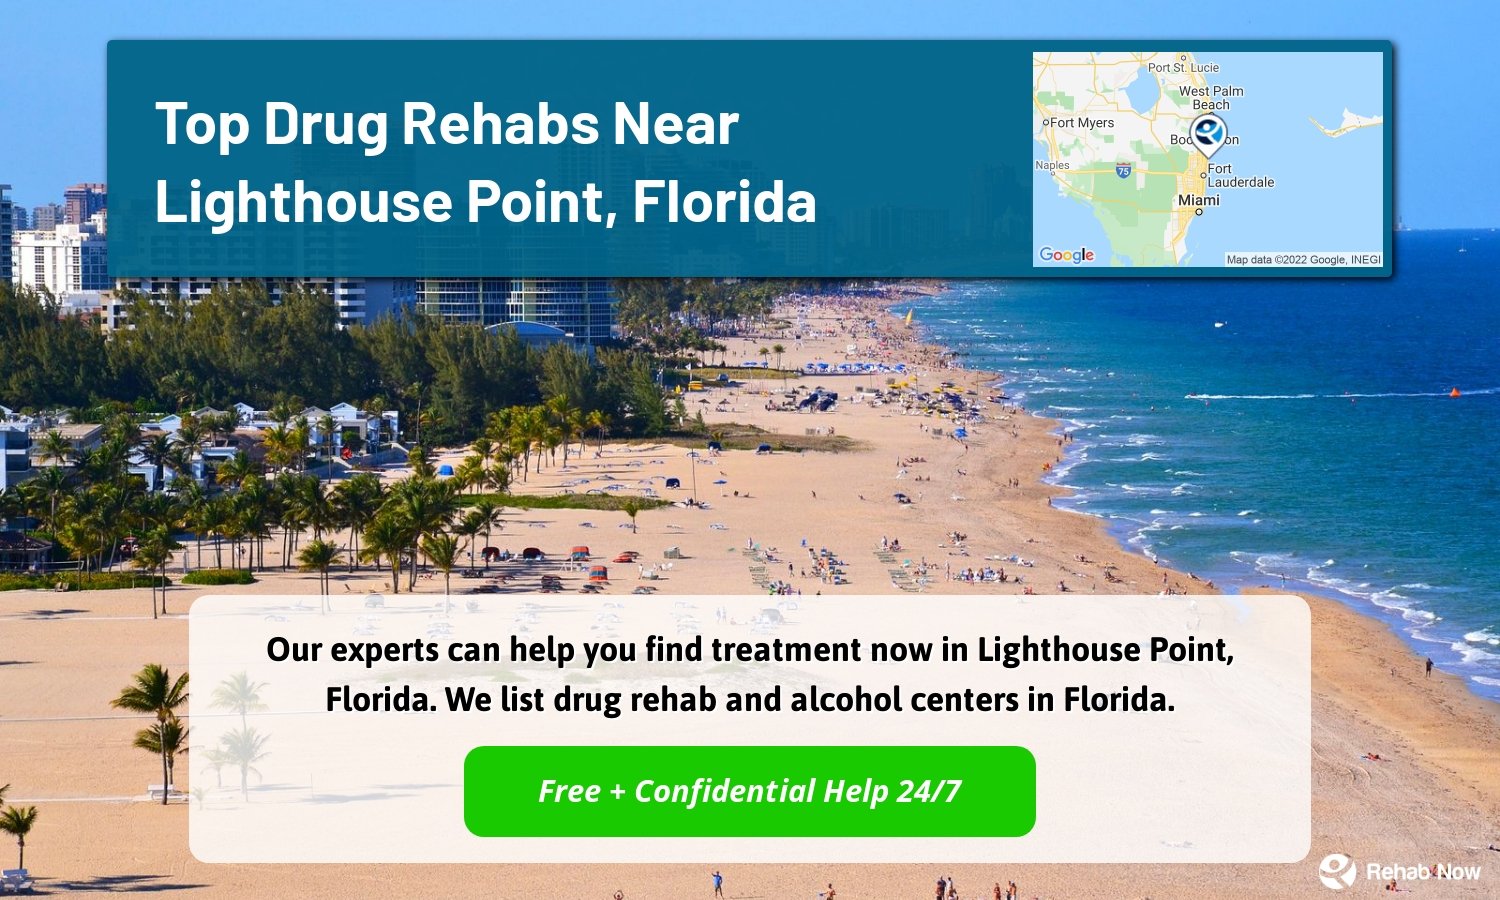 Our experts can help you find treatment now in Lighthouse Point, Florida. We list drug rehab and alcohol centers in Florida.